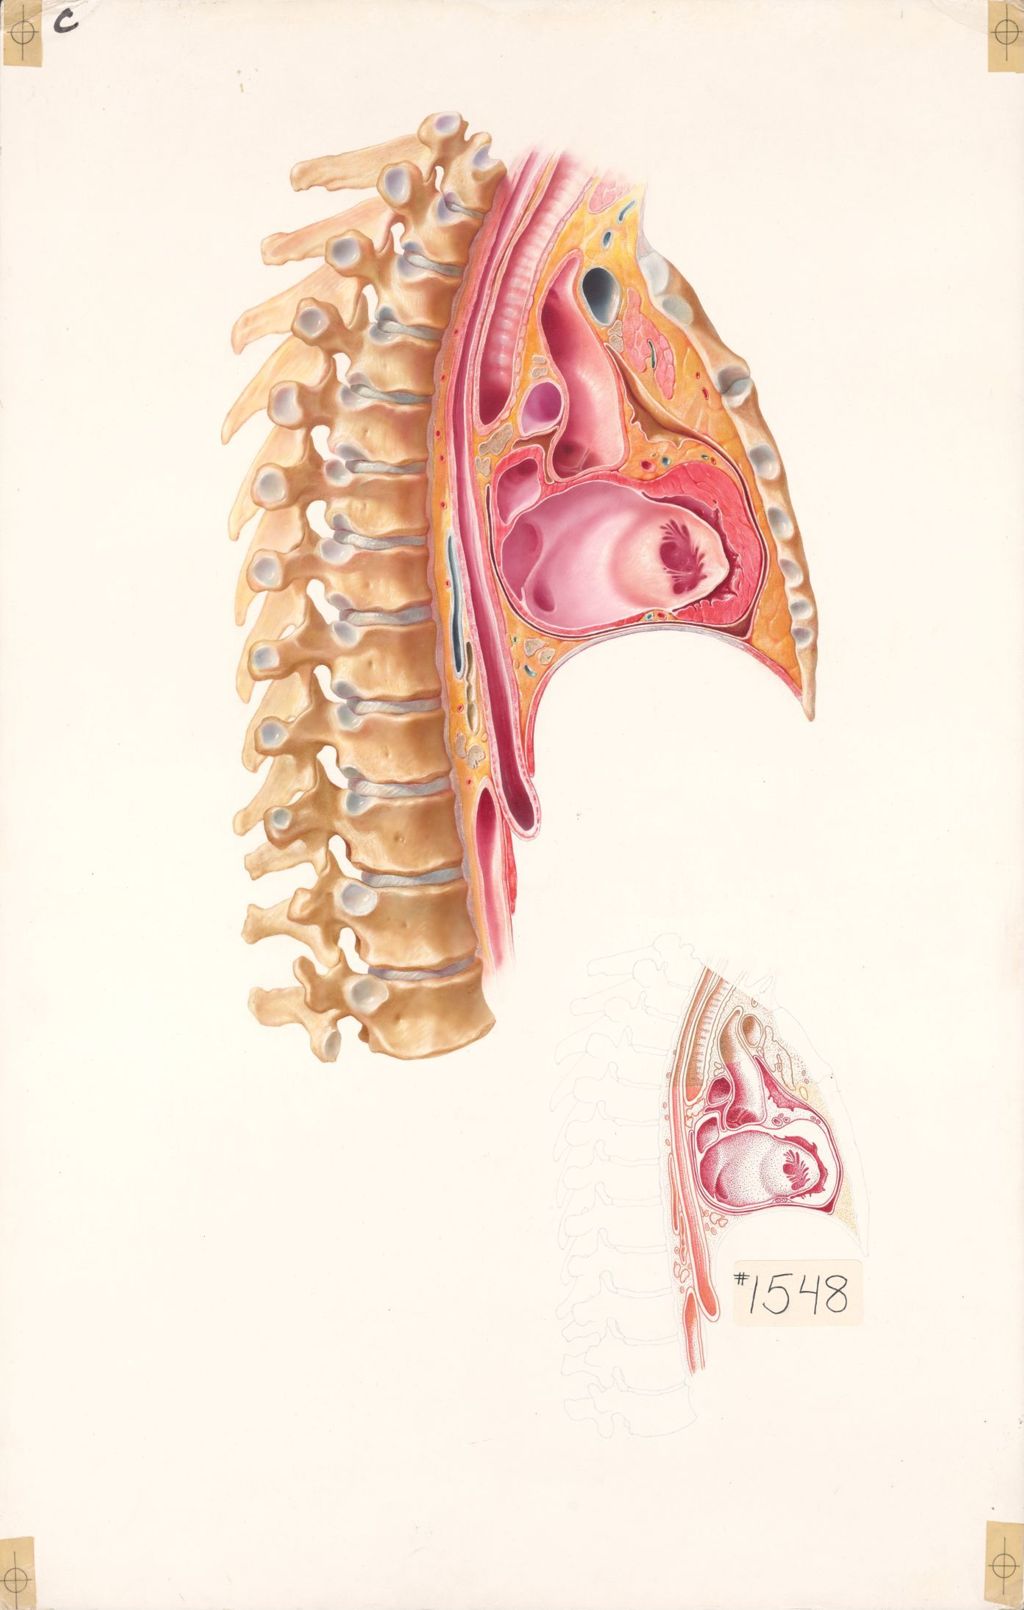 Miniature of The Anatomical Disposition of the Thorax, The Mediastinum, Plate I, Sagittal Section through the Mediastinum